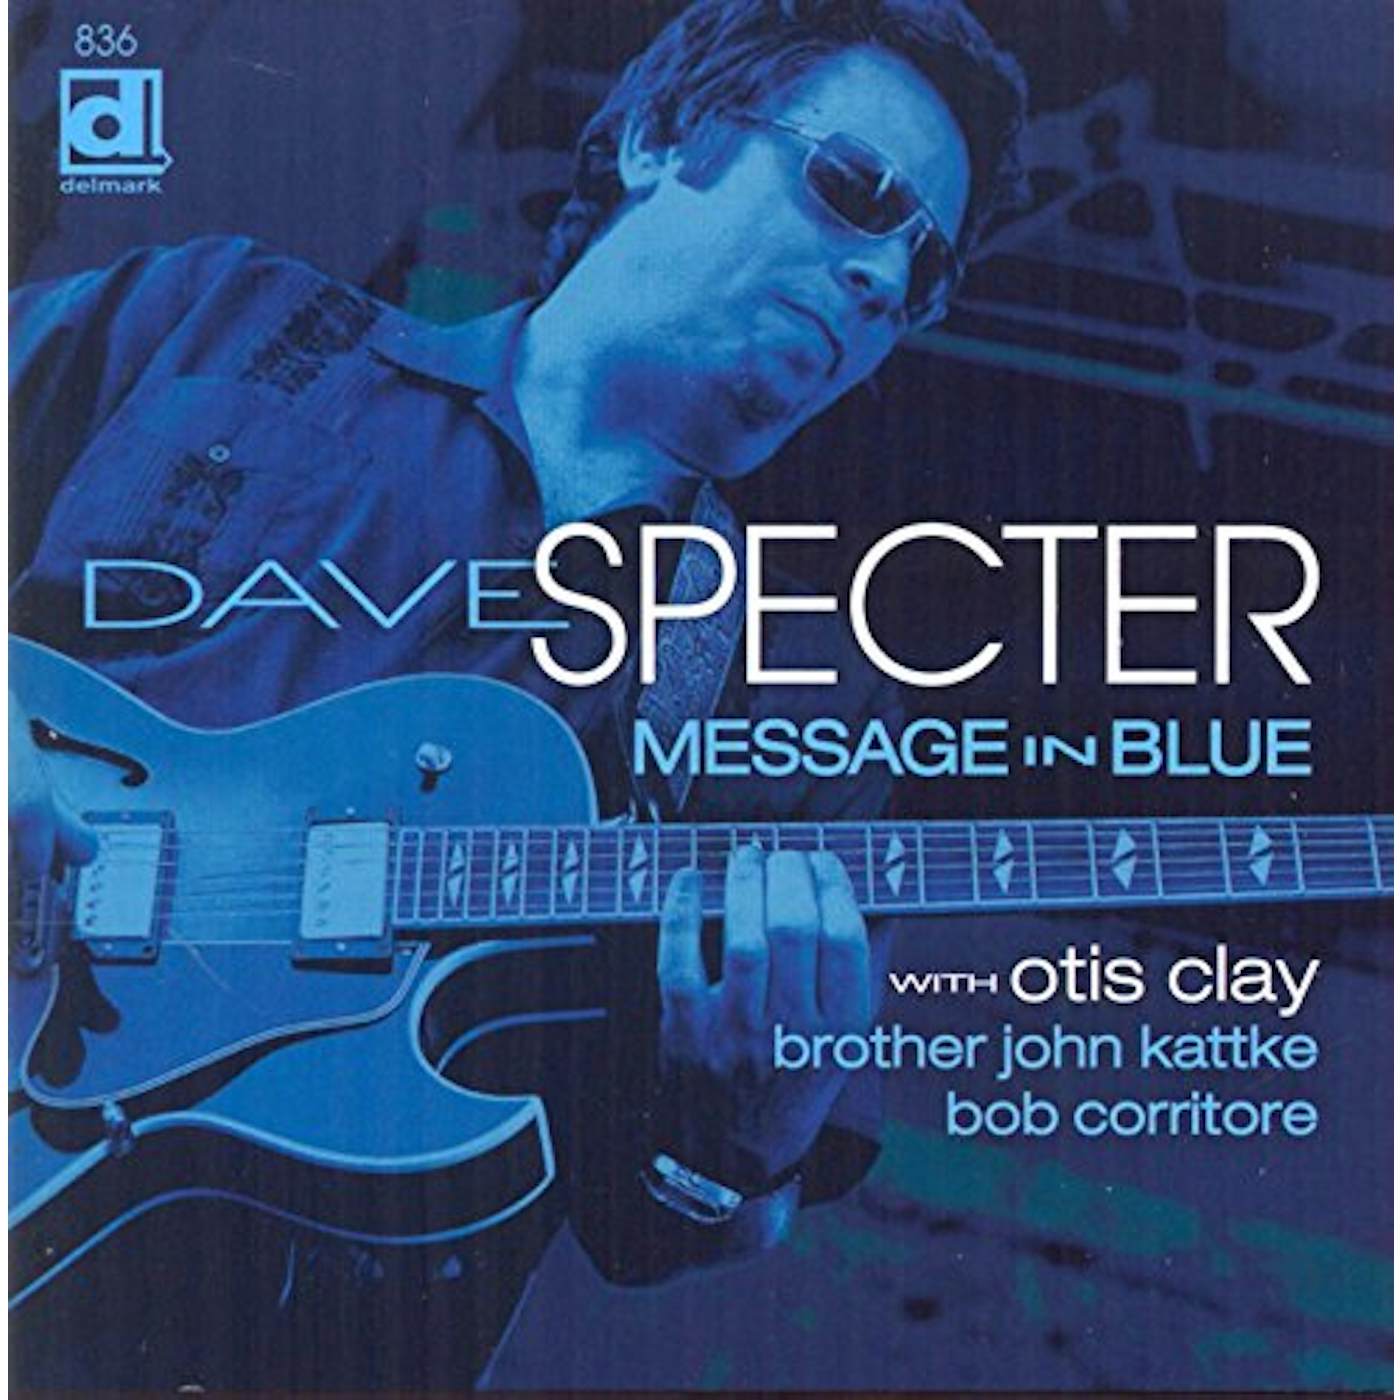 Dave Specter MESSAGE IN BLUE CD